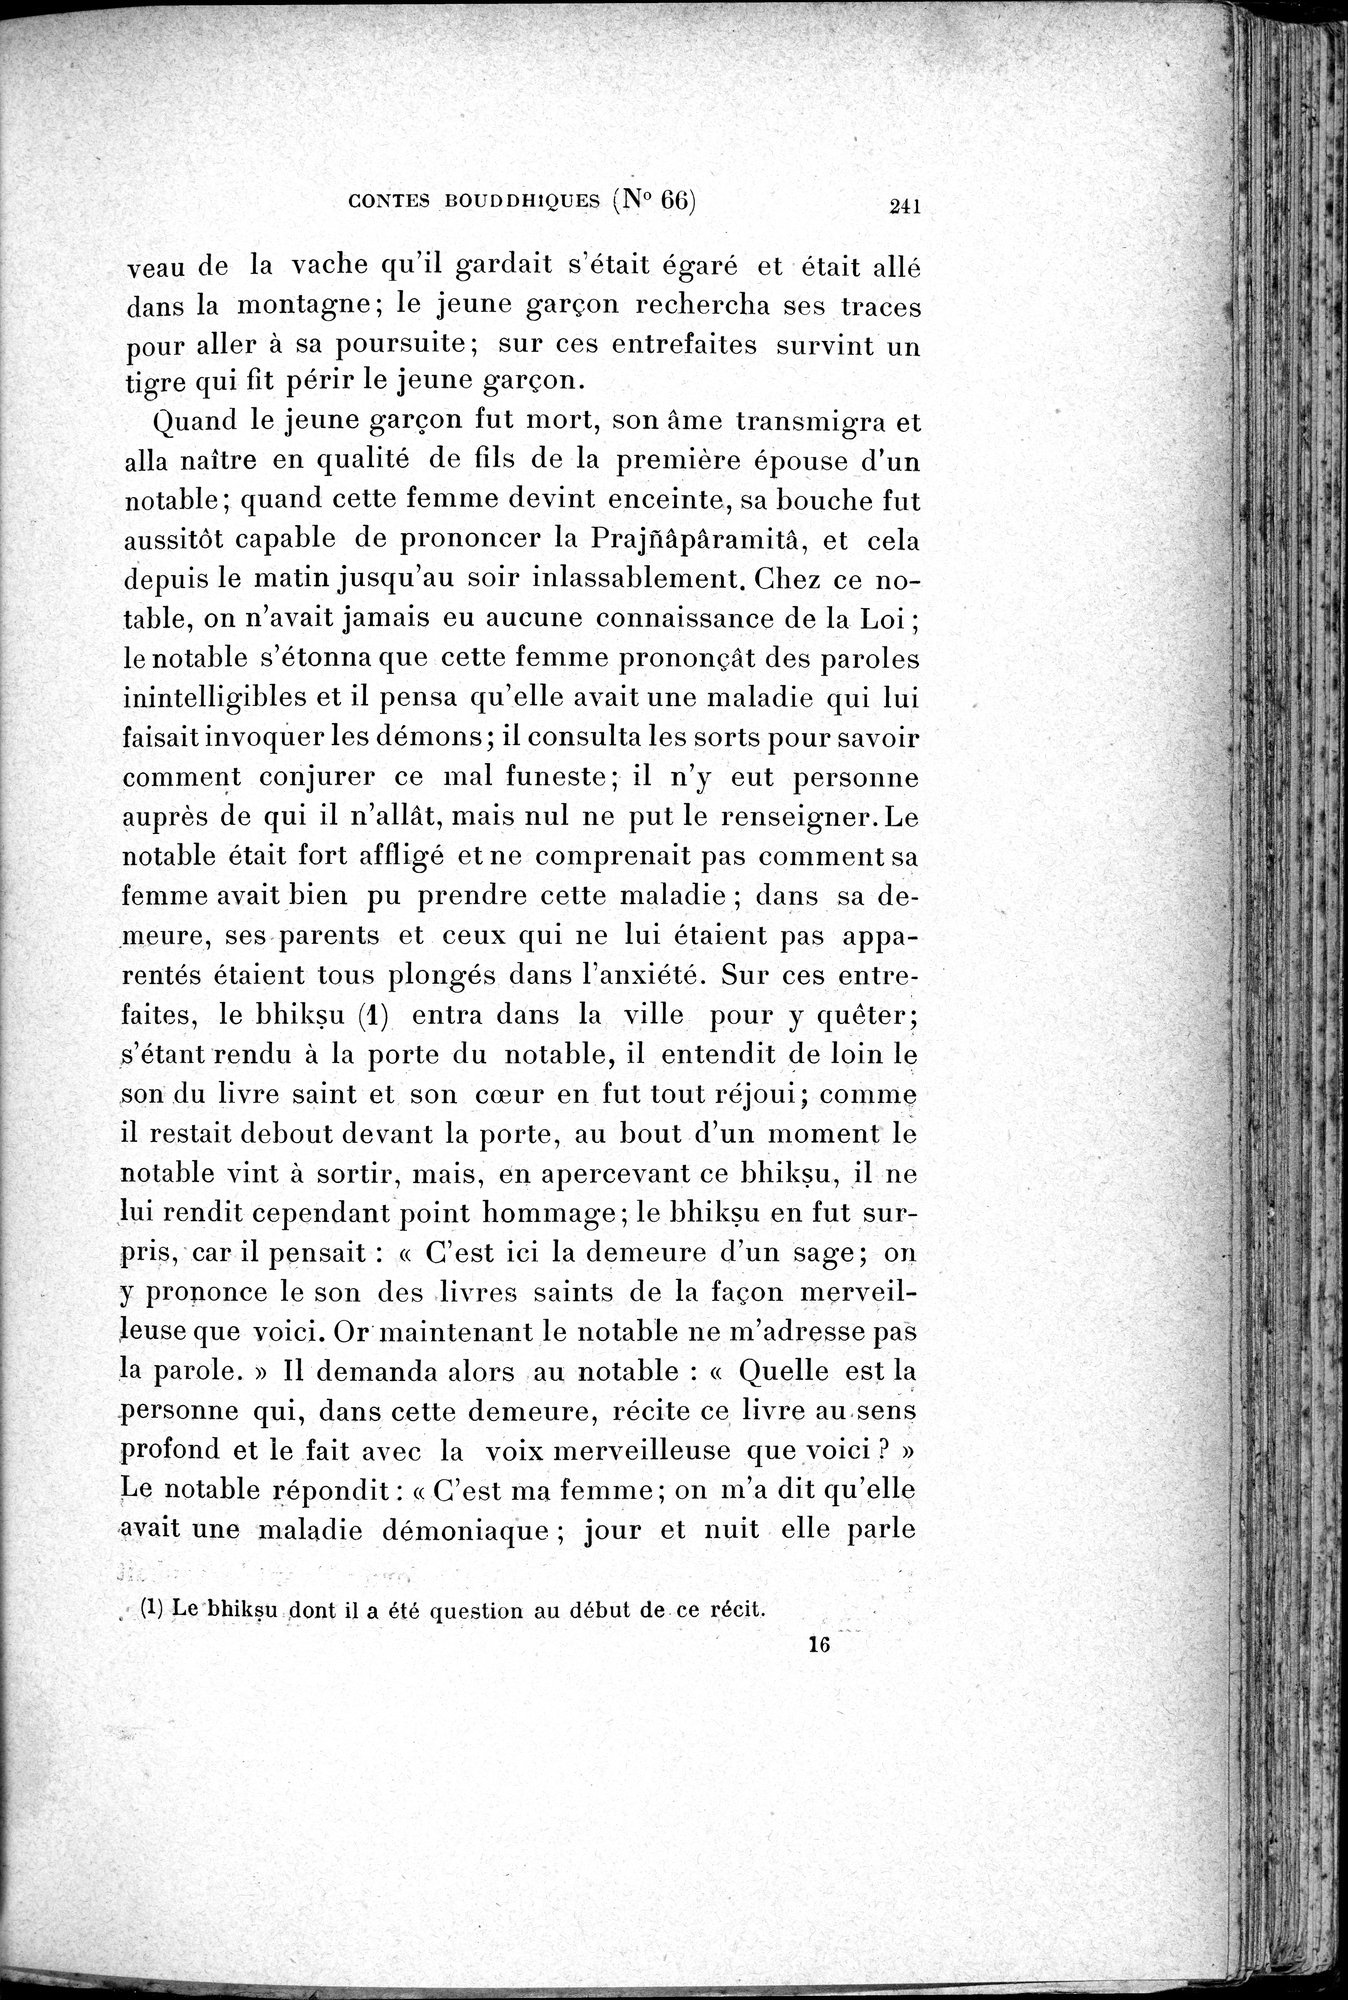 Cinq Cents Contes et Apologues : vol.1 / Page 275 (Grayscale High Resolution Image)